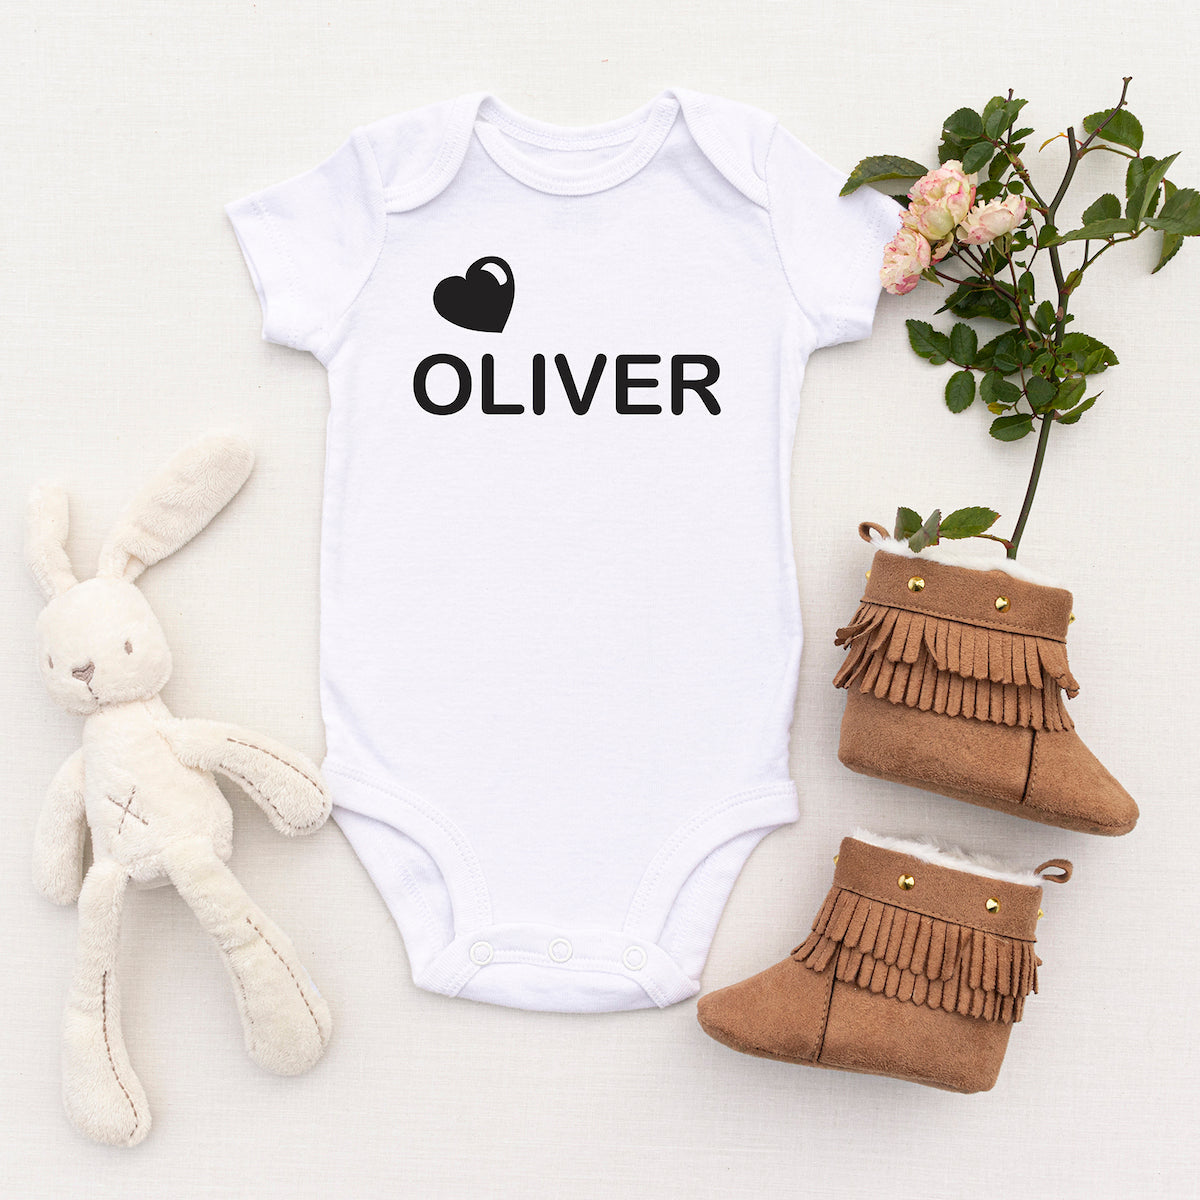 Personalised White Baby Body Suit Grow Vest - Graphic Heart